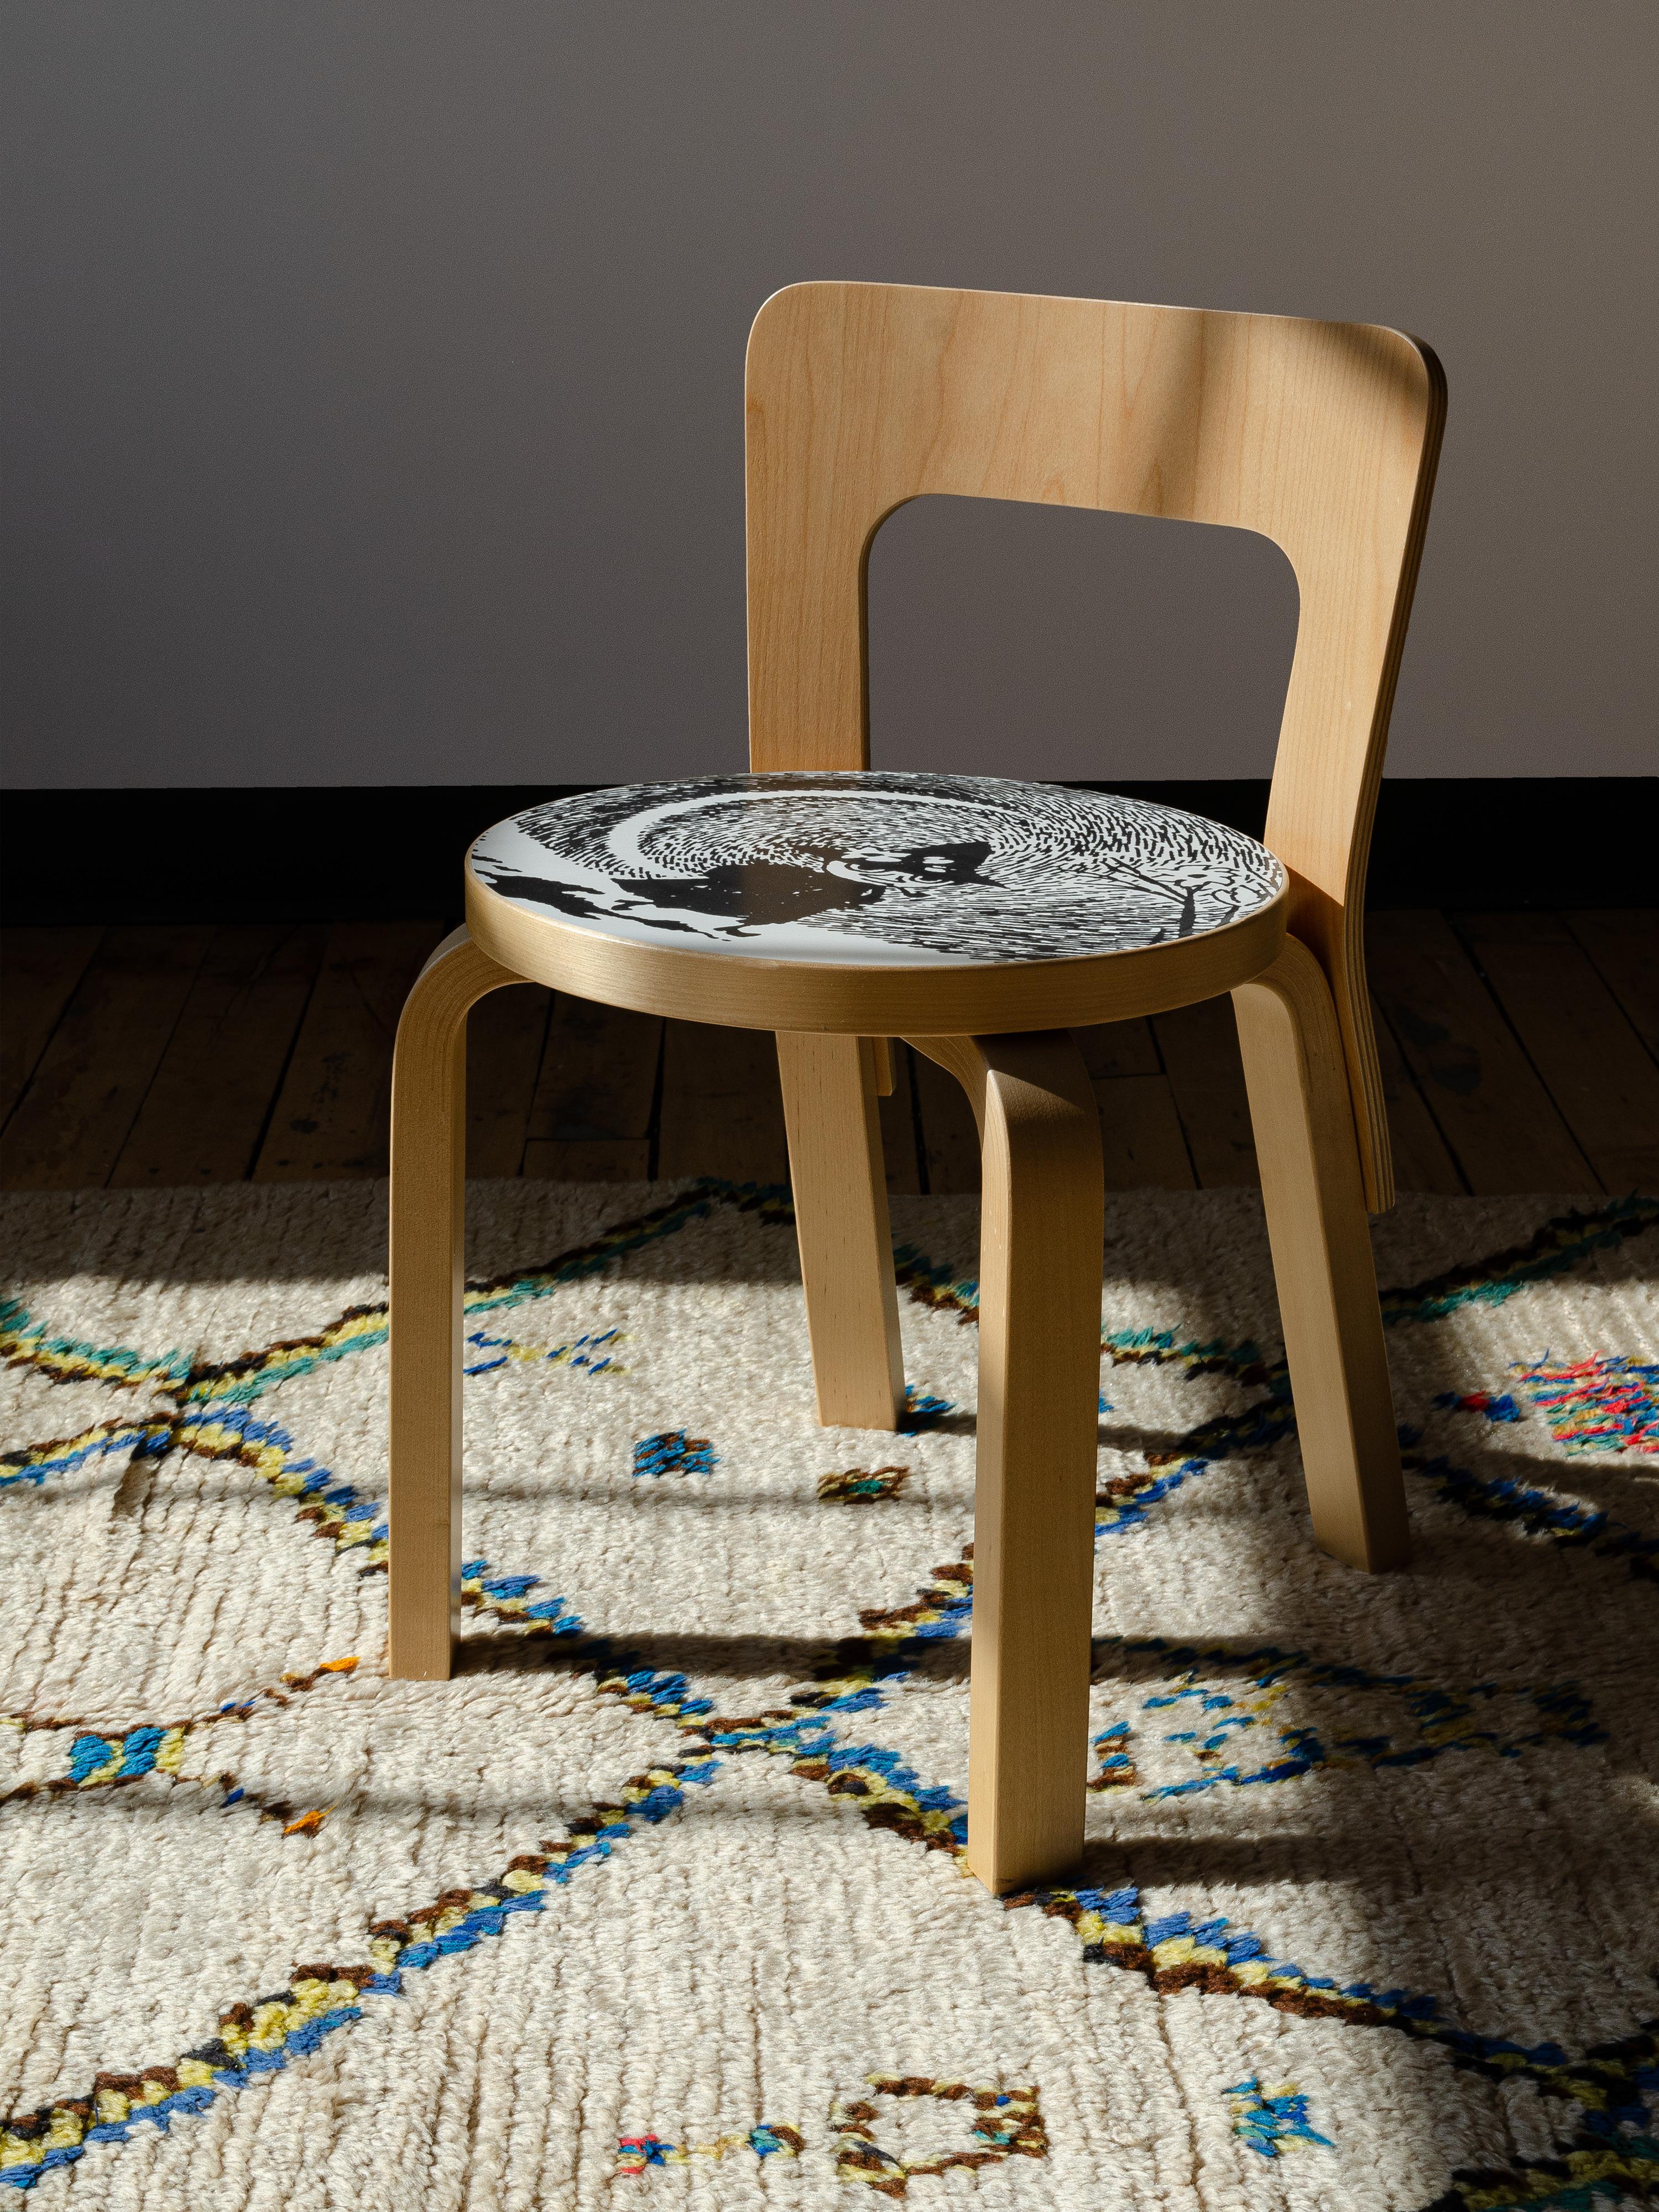 Artek's N65 children's chair is a slightly re-sized model of Chair 65 designed by Alvar Aalto in 1935. In 2013, in honor of the 80th anniversary, Artek released classic furniture decorated with beloved Moomin characters. The seat of the chair is